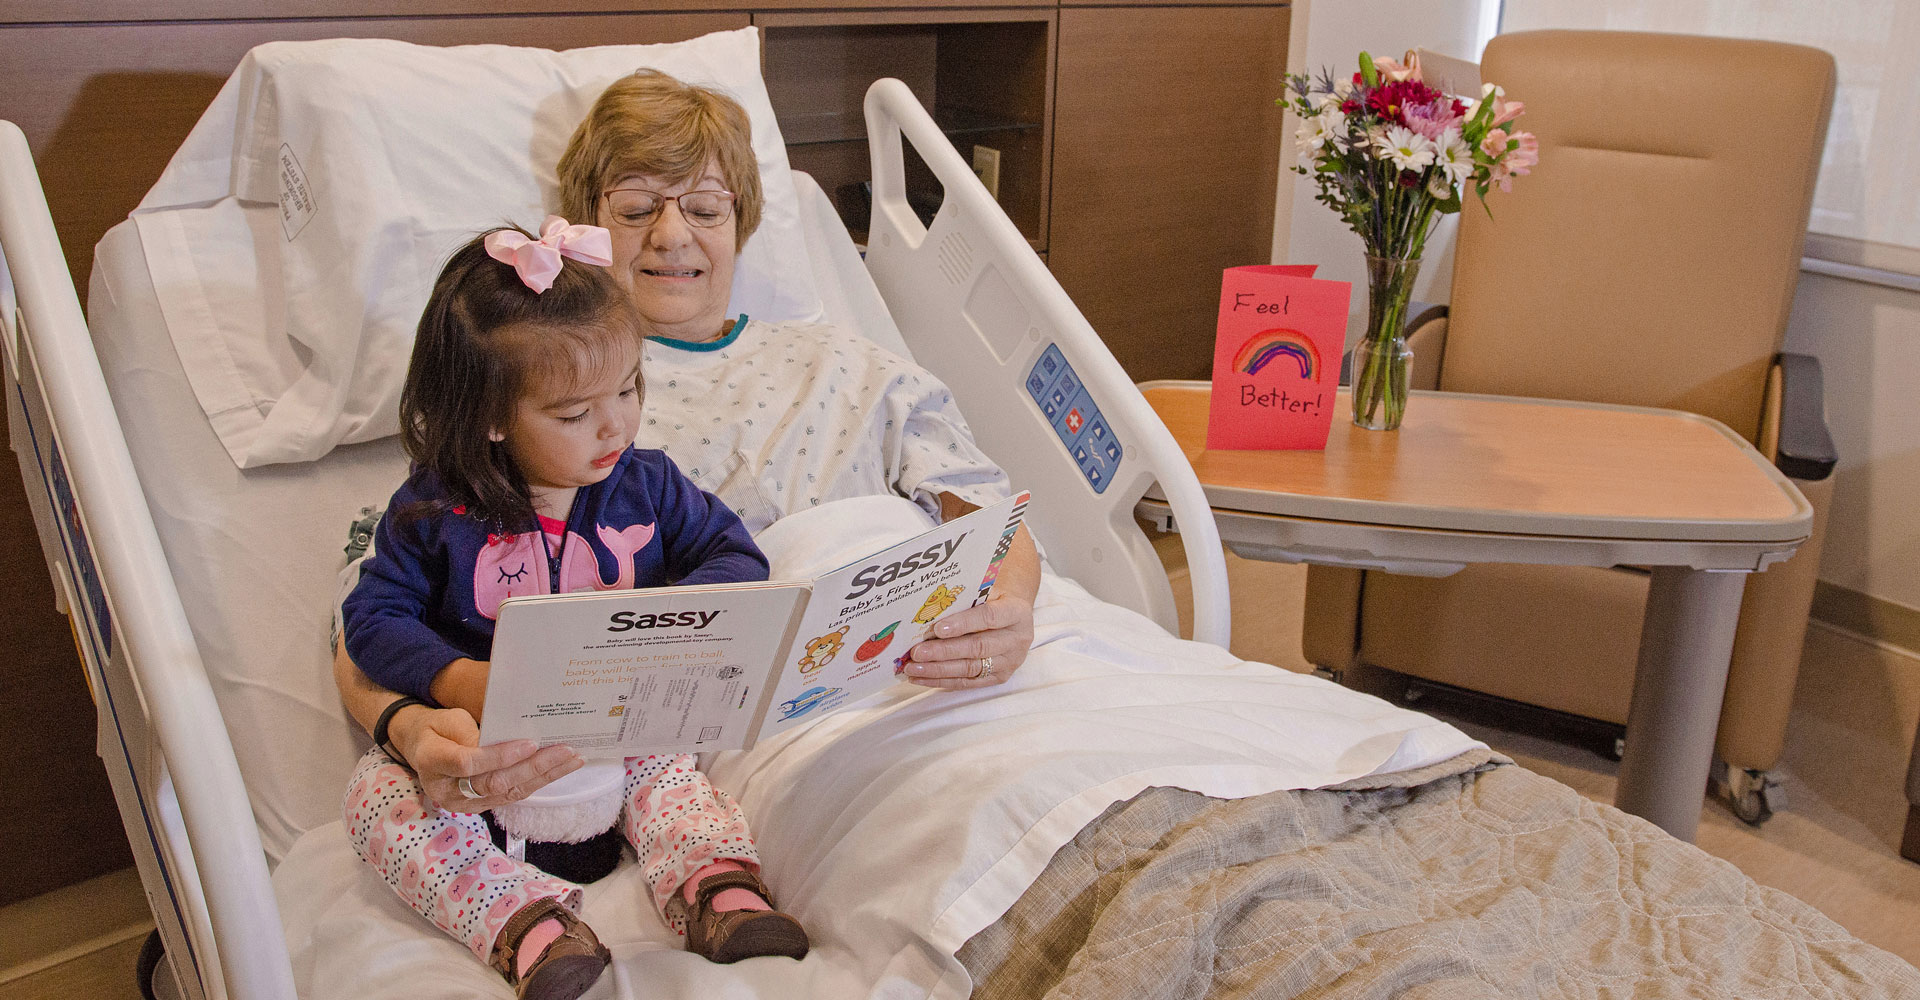 Grandma reading to little granddaughter while she visits grandma in the hospital